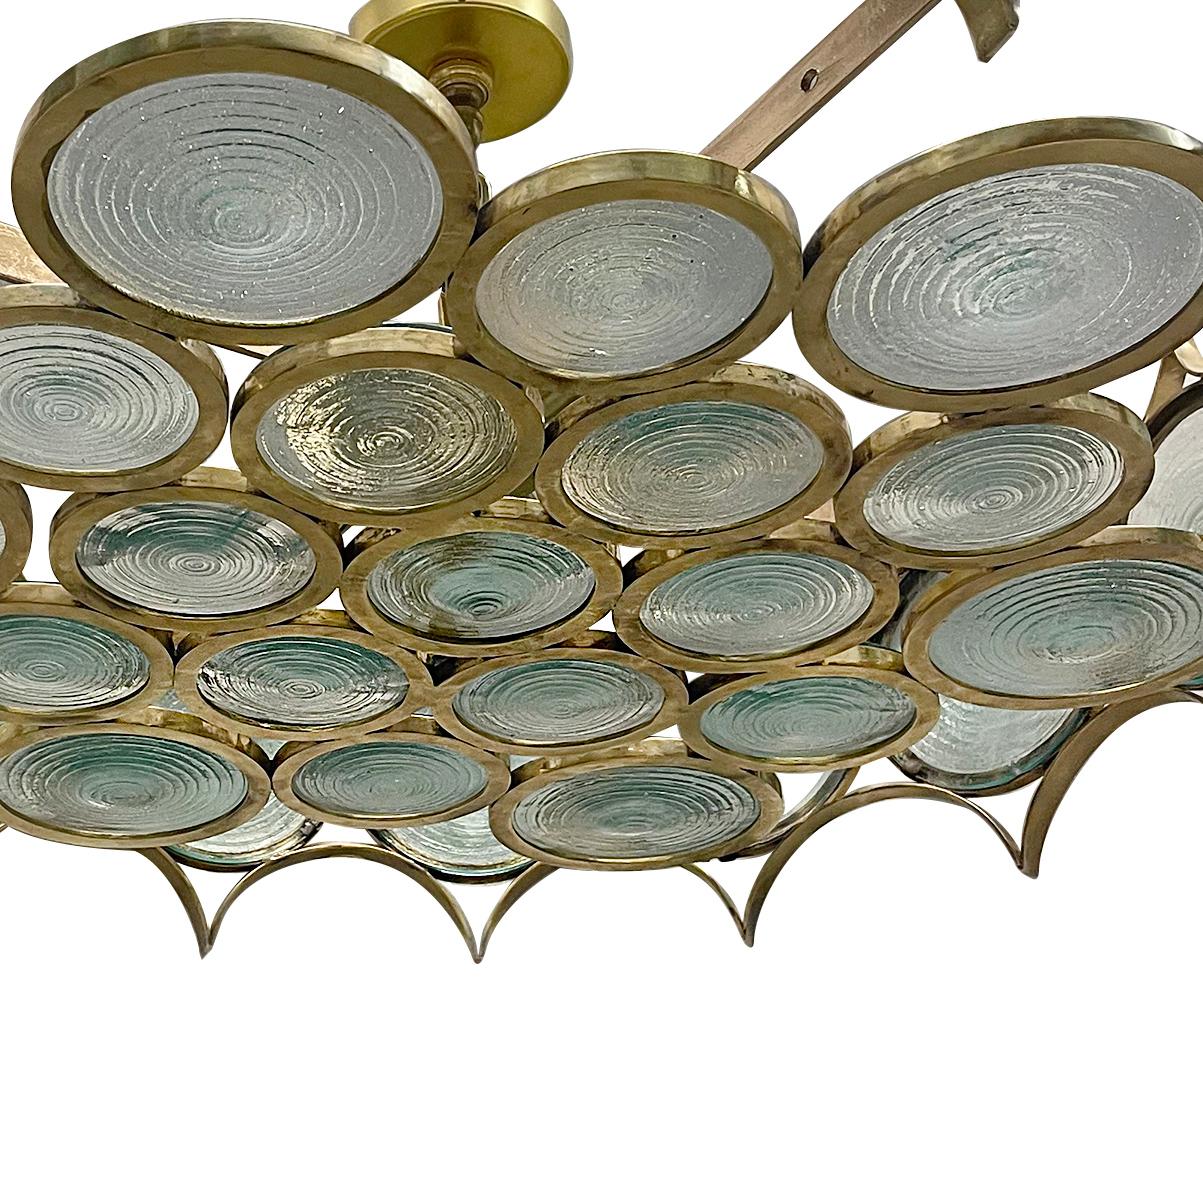 Moderne style circa 1960's Italian polished bronze light fixture with convex molded glass insets.

Measurements:
Diameter: 38